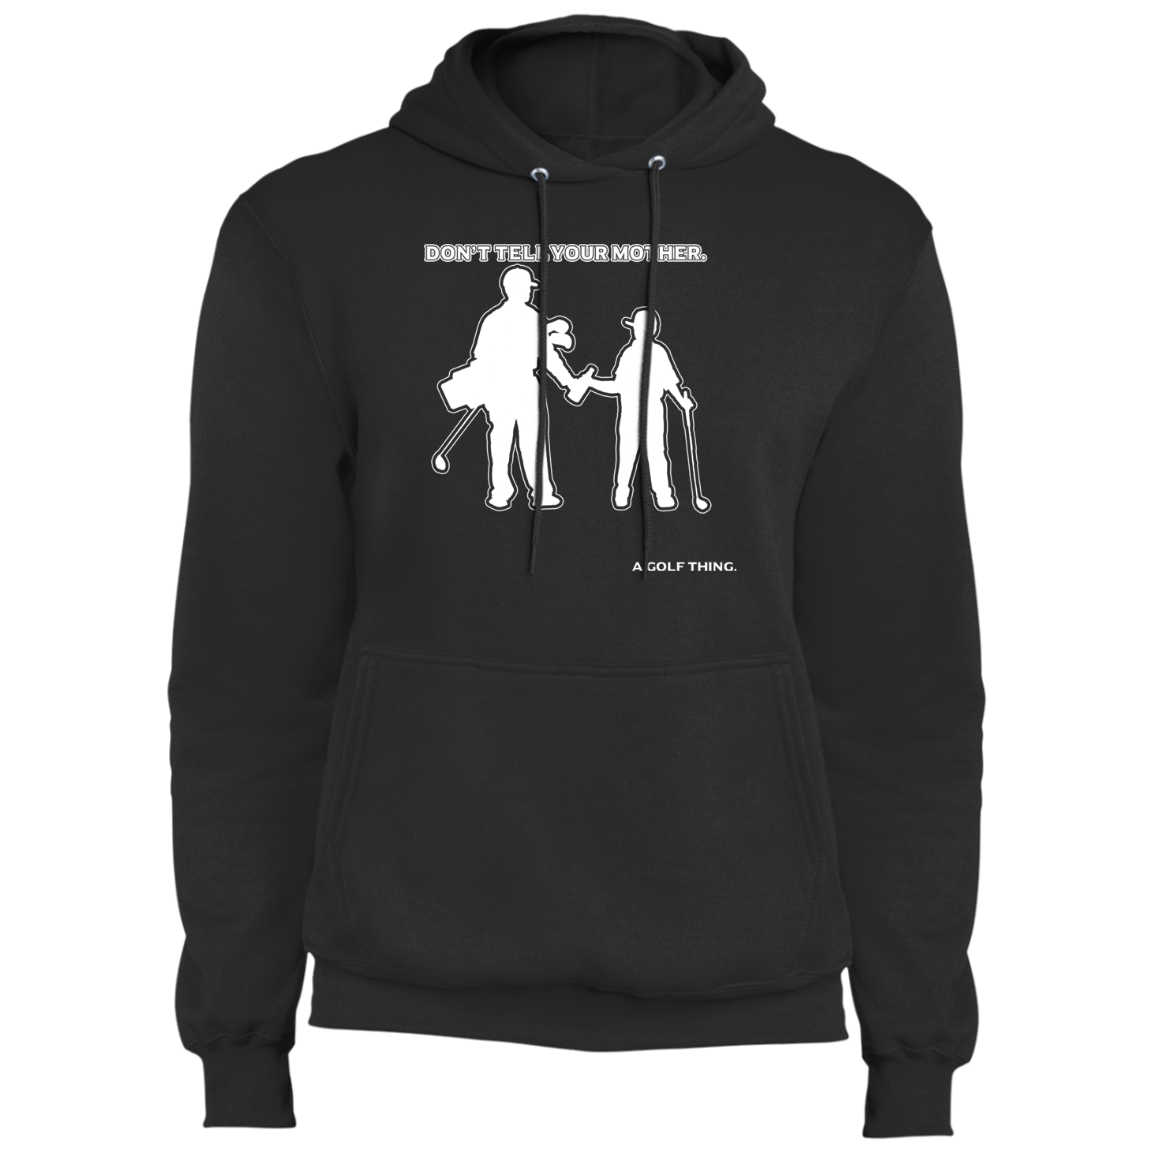 OPG Custom Design #7. Father and Son's First Beer. Don't Tell Your Mother. Fleece Pullover Hoodie